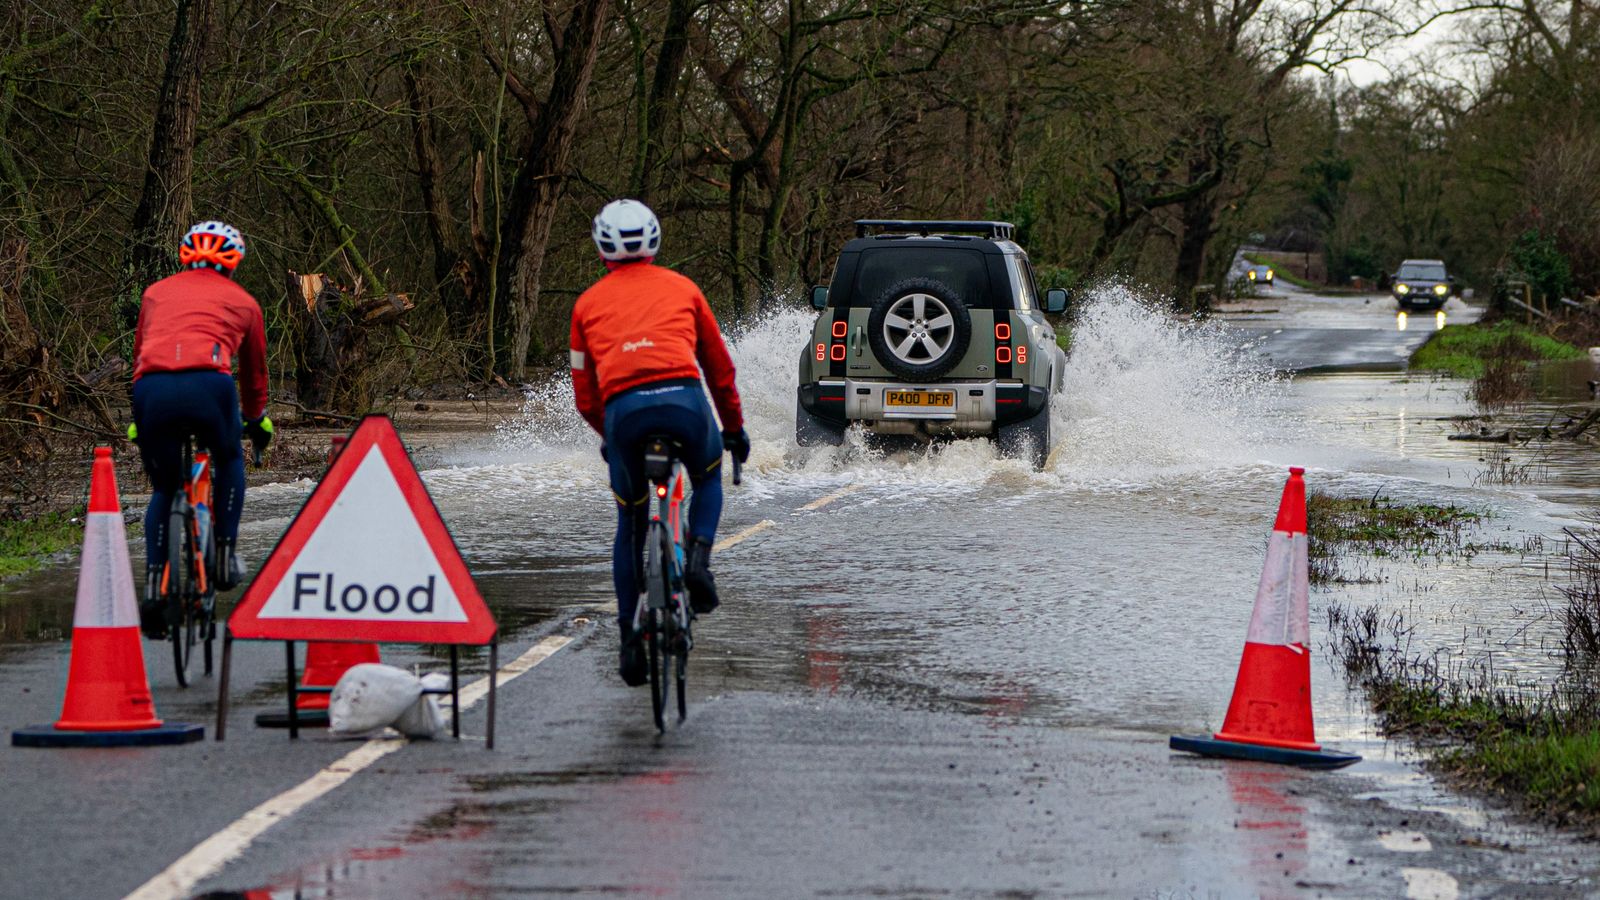 UK weather: Flood warnings as temperatures fall - leading to snow, sleet and ice in parts